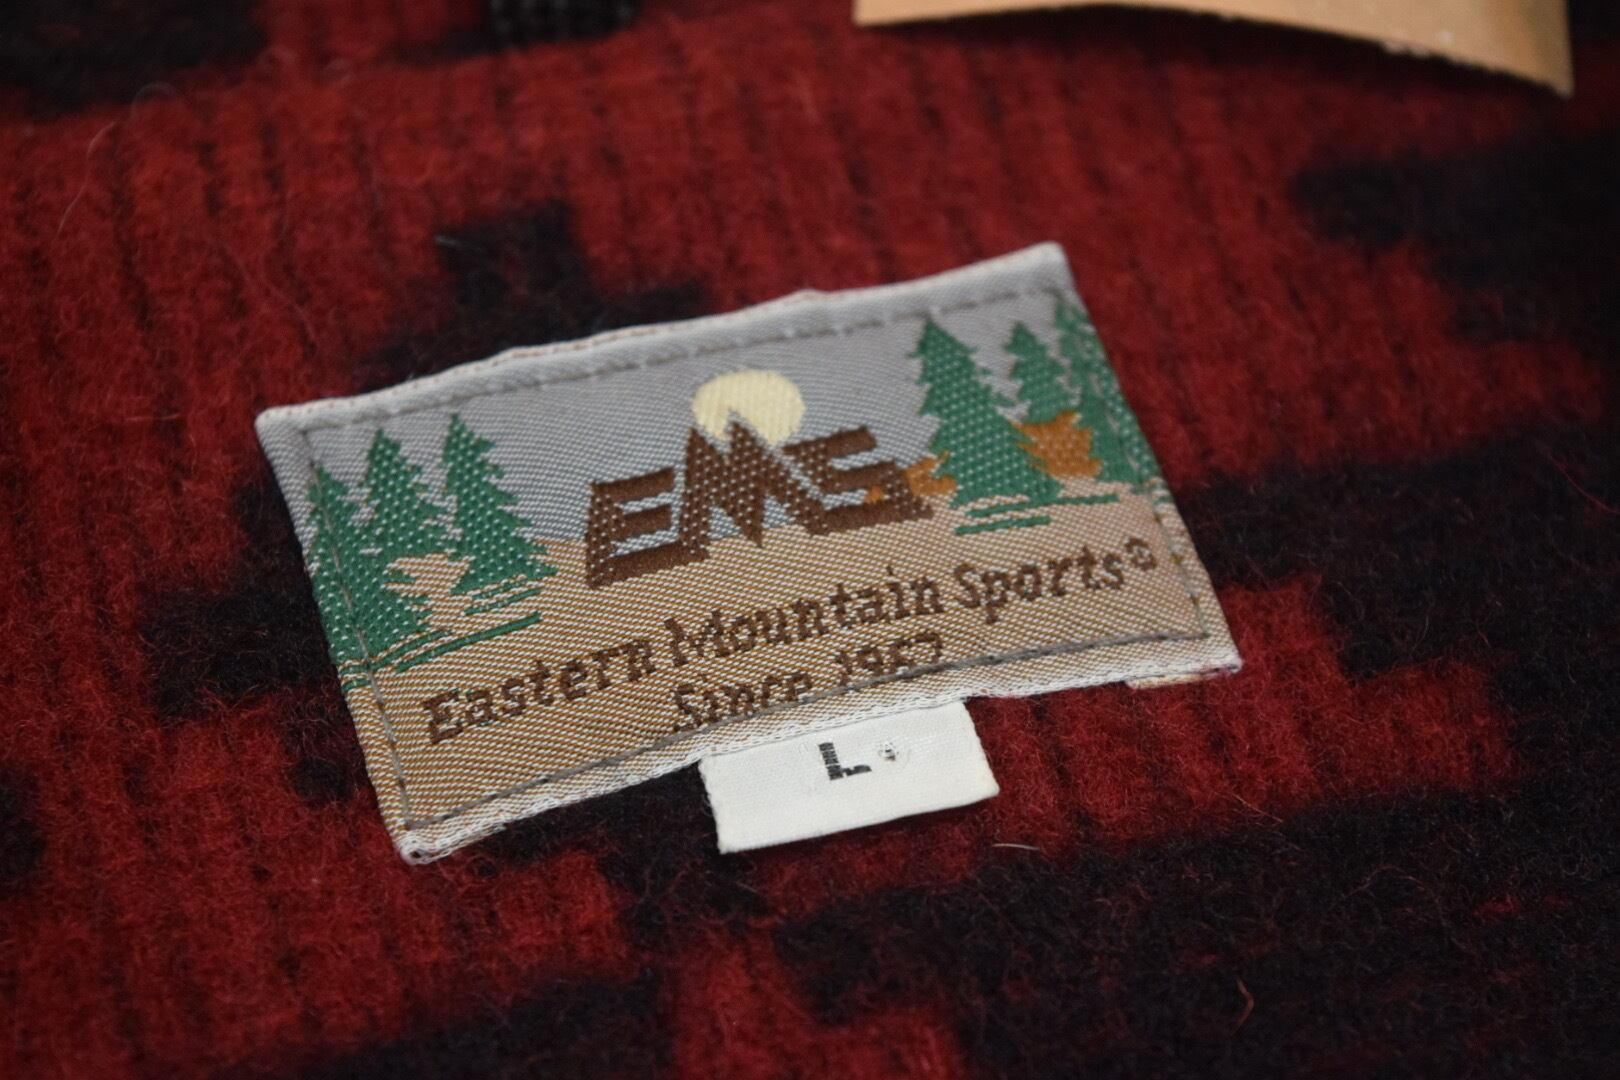 1990s EMS WOOL JACKET　MADE IN USA